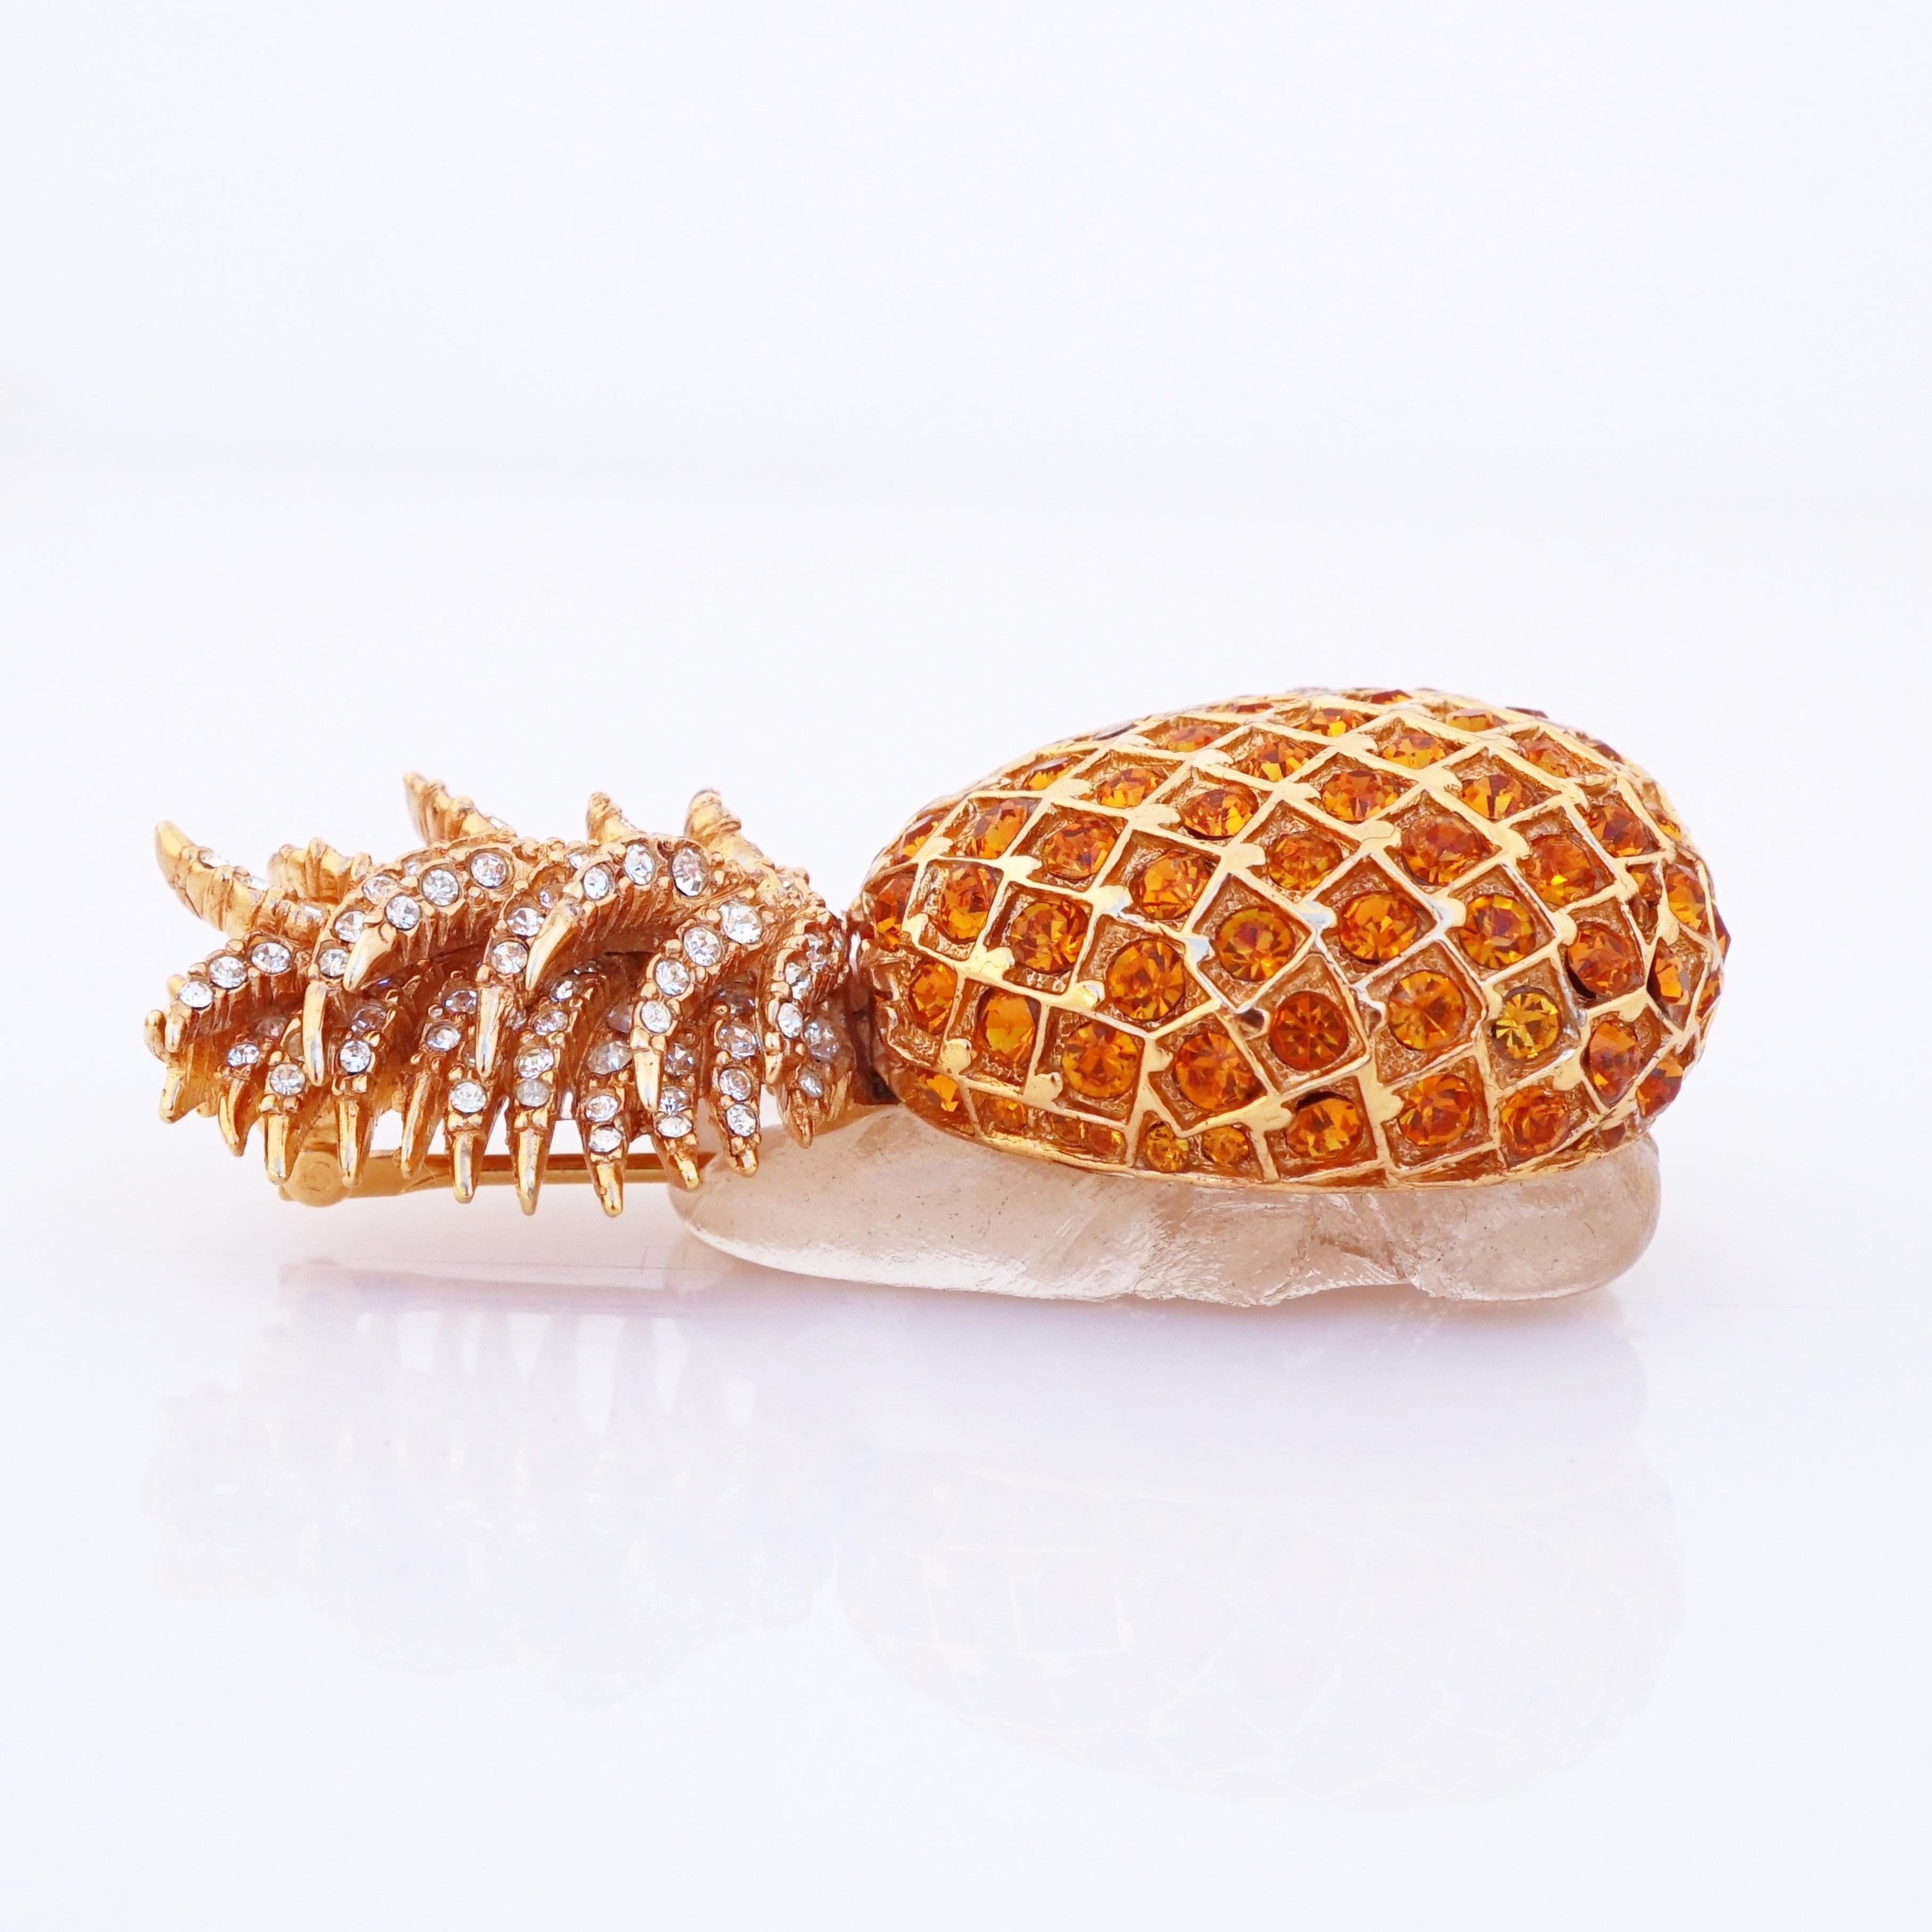 Modern Gilded Pineapple Brooch With Topaz Crystals By Ciner, 1980s